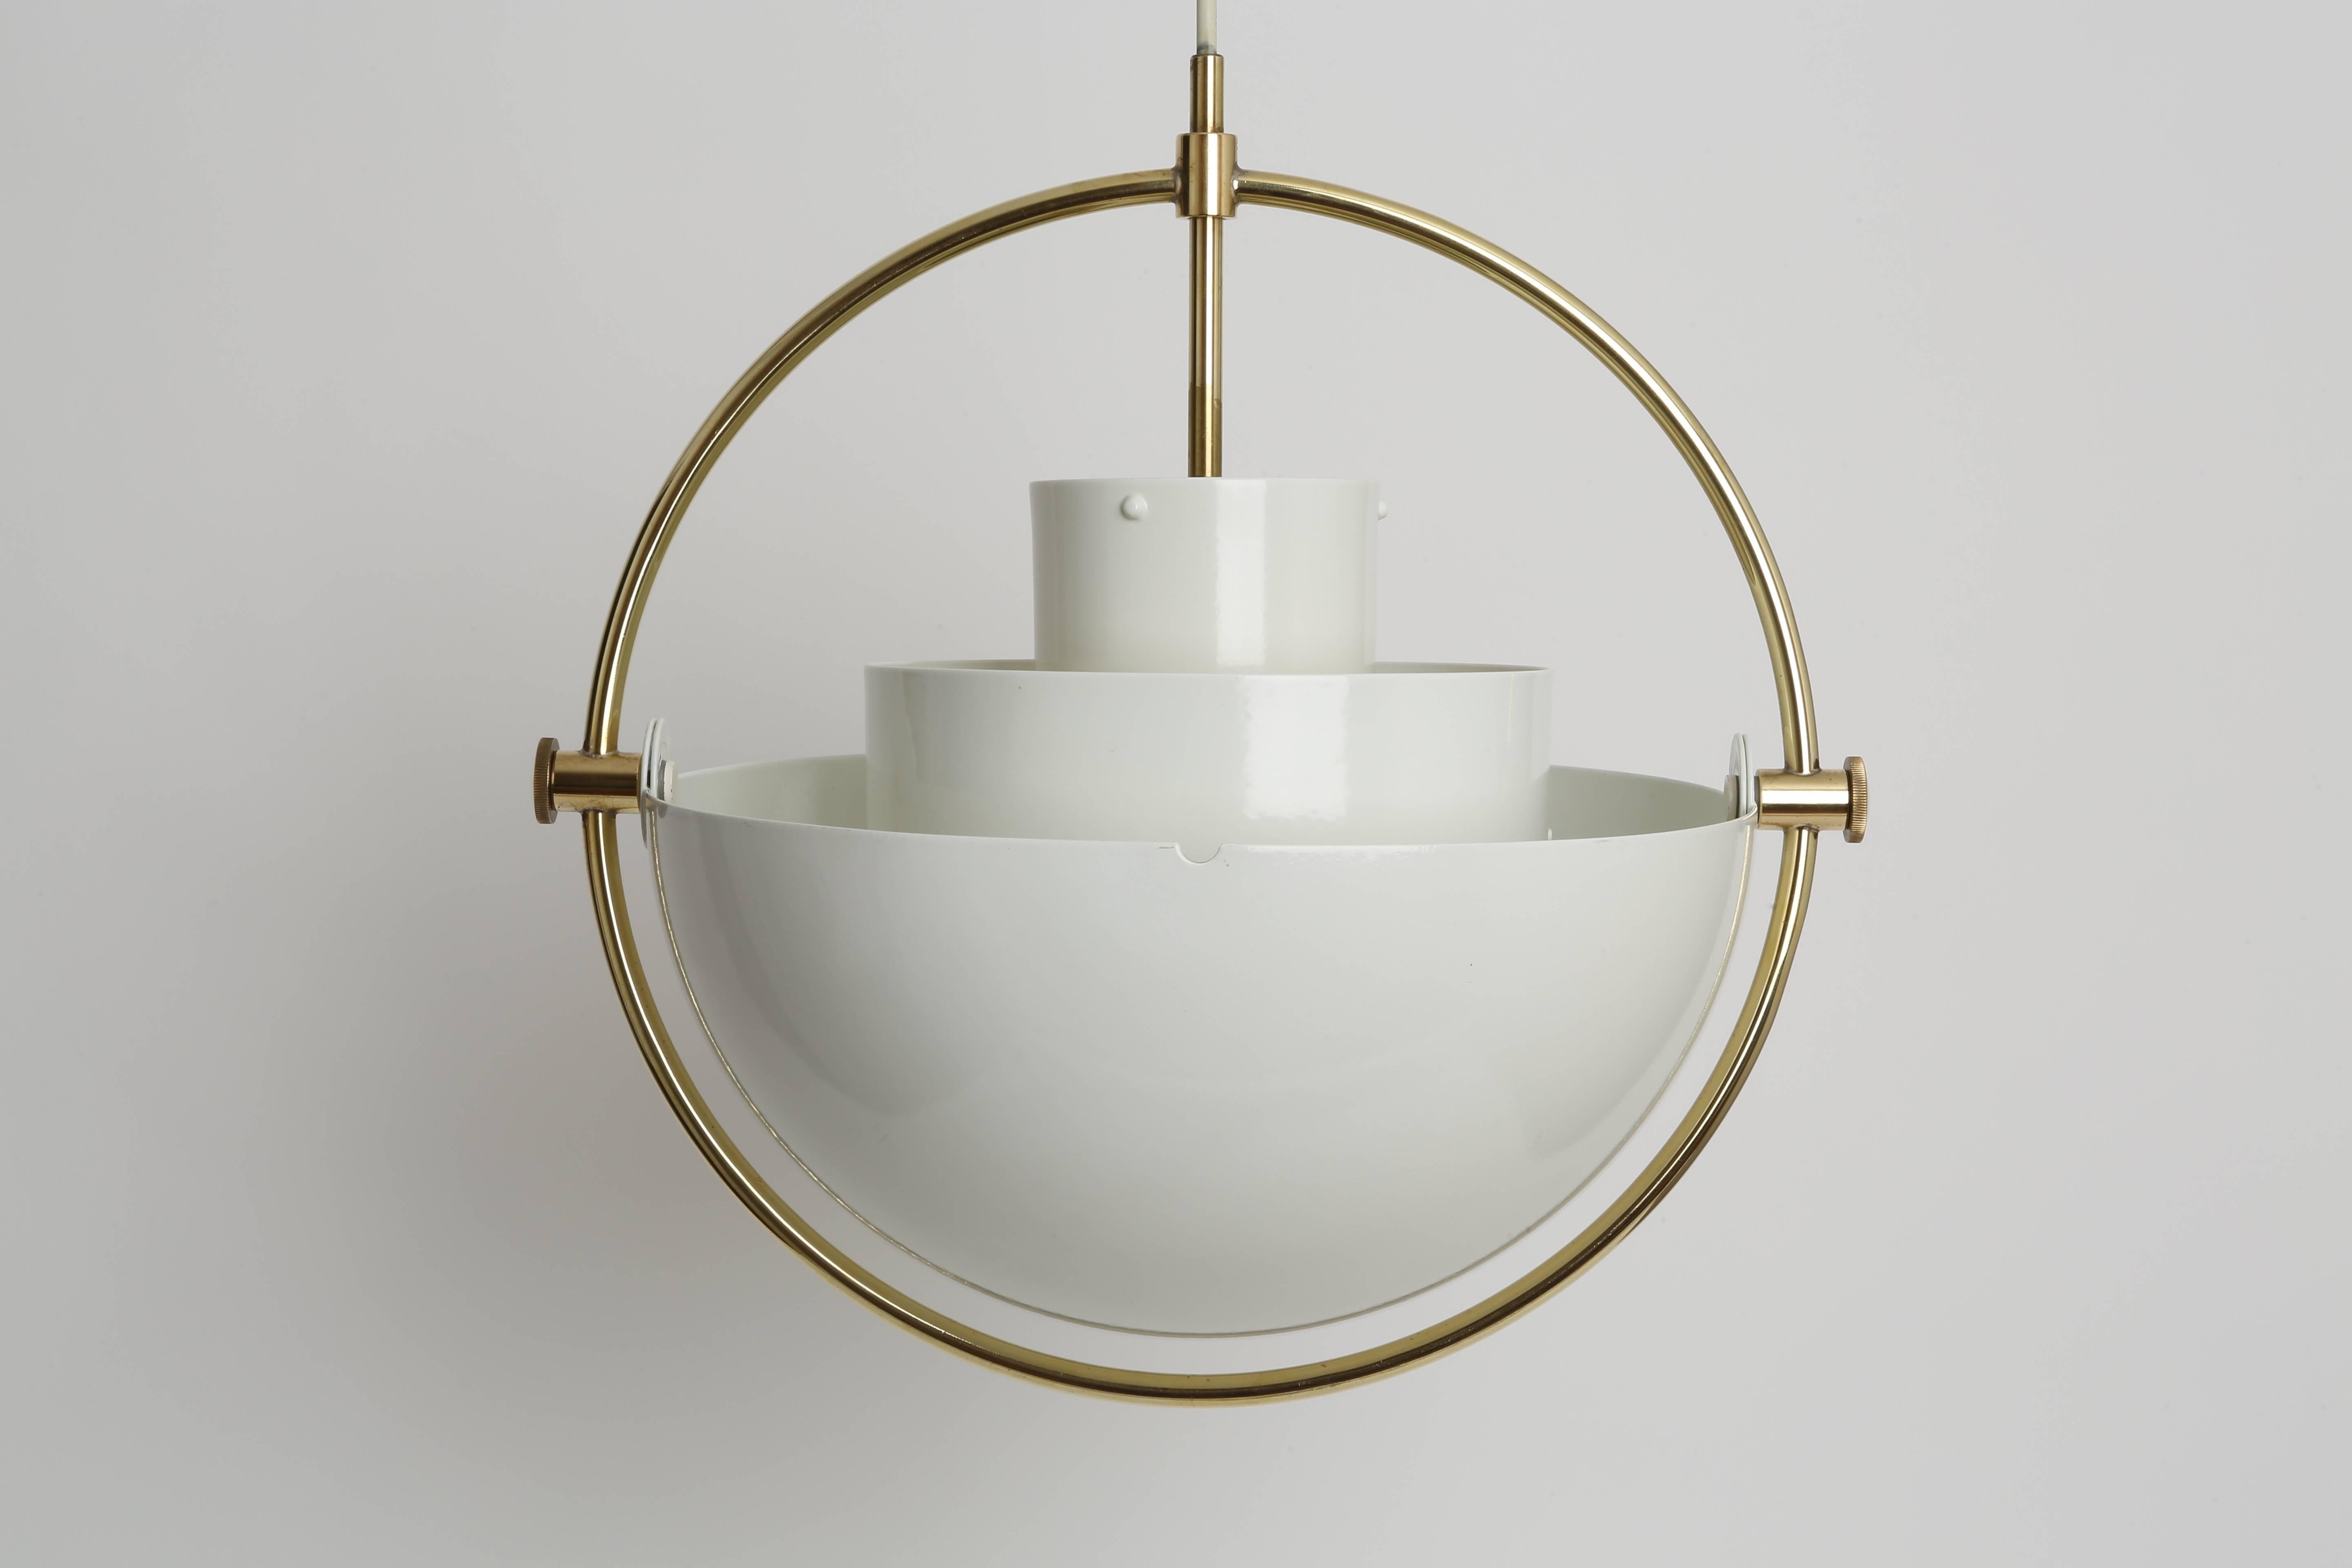 Multi-light ceiling pendant by Louis Weisdorf.
Very versatile pendant made out of brass and enameled metal.
Has one-light bulb.